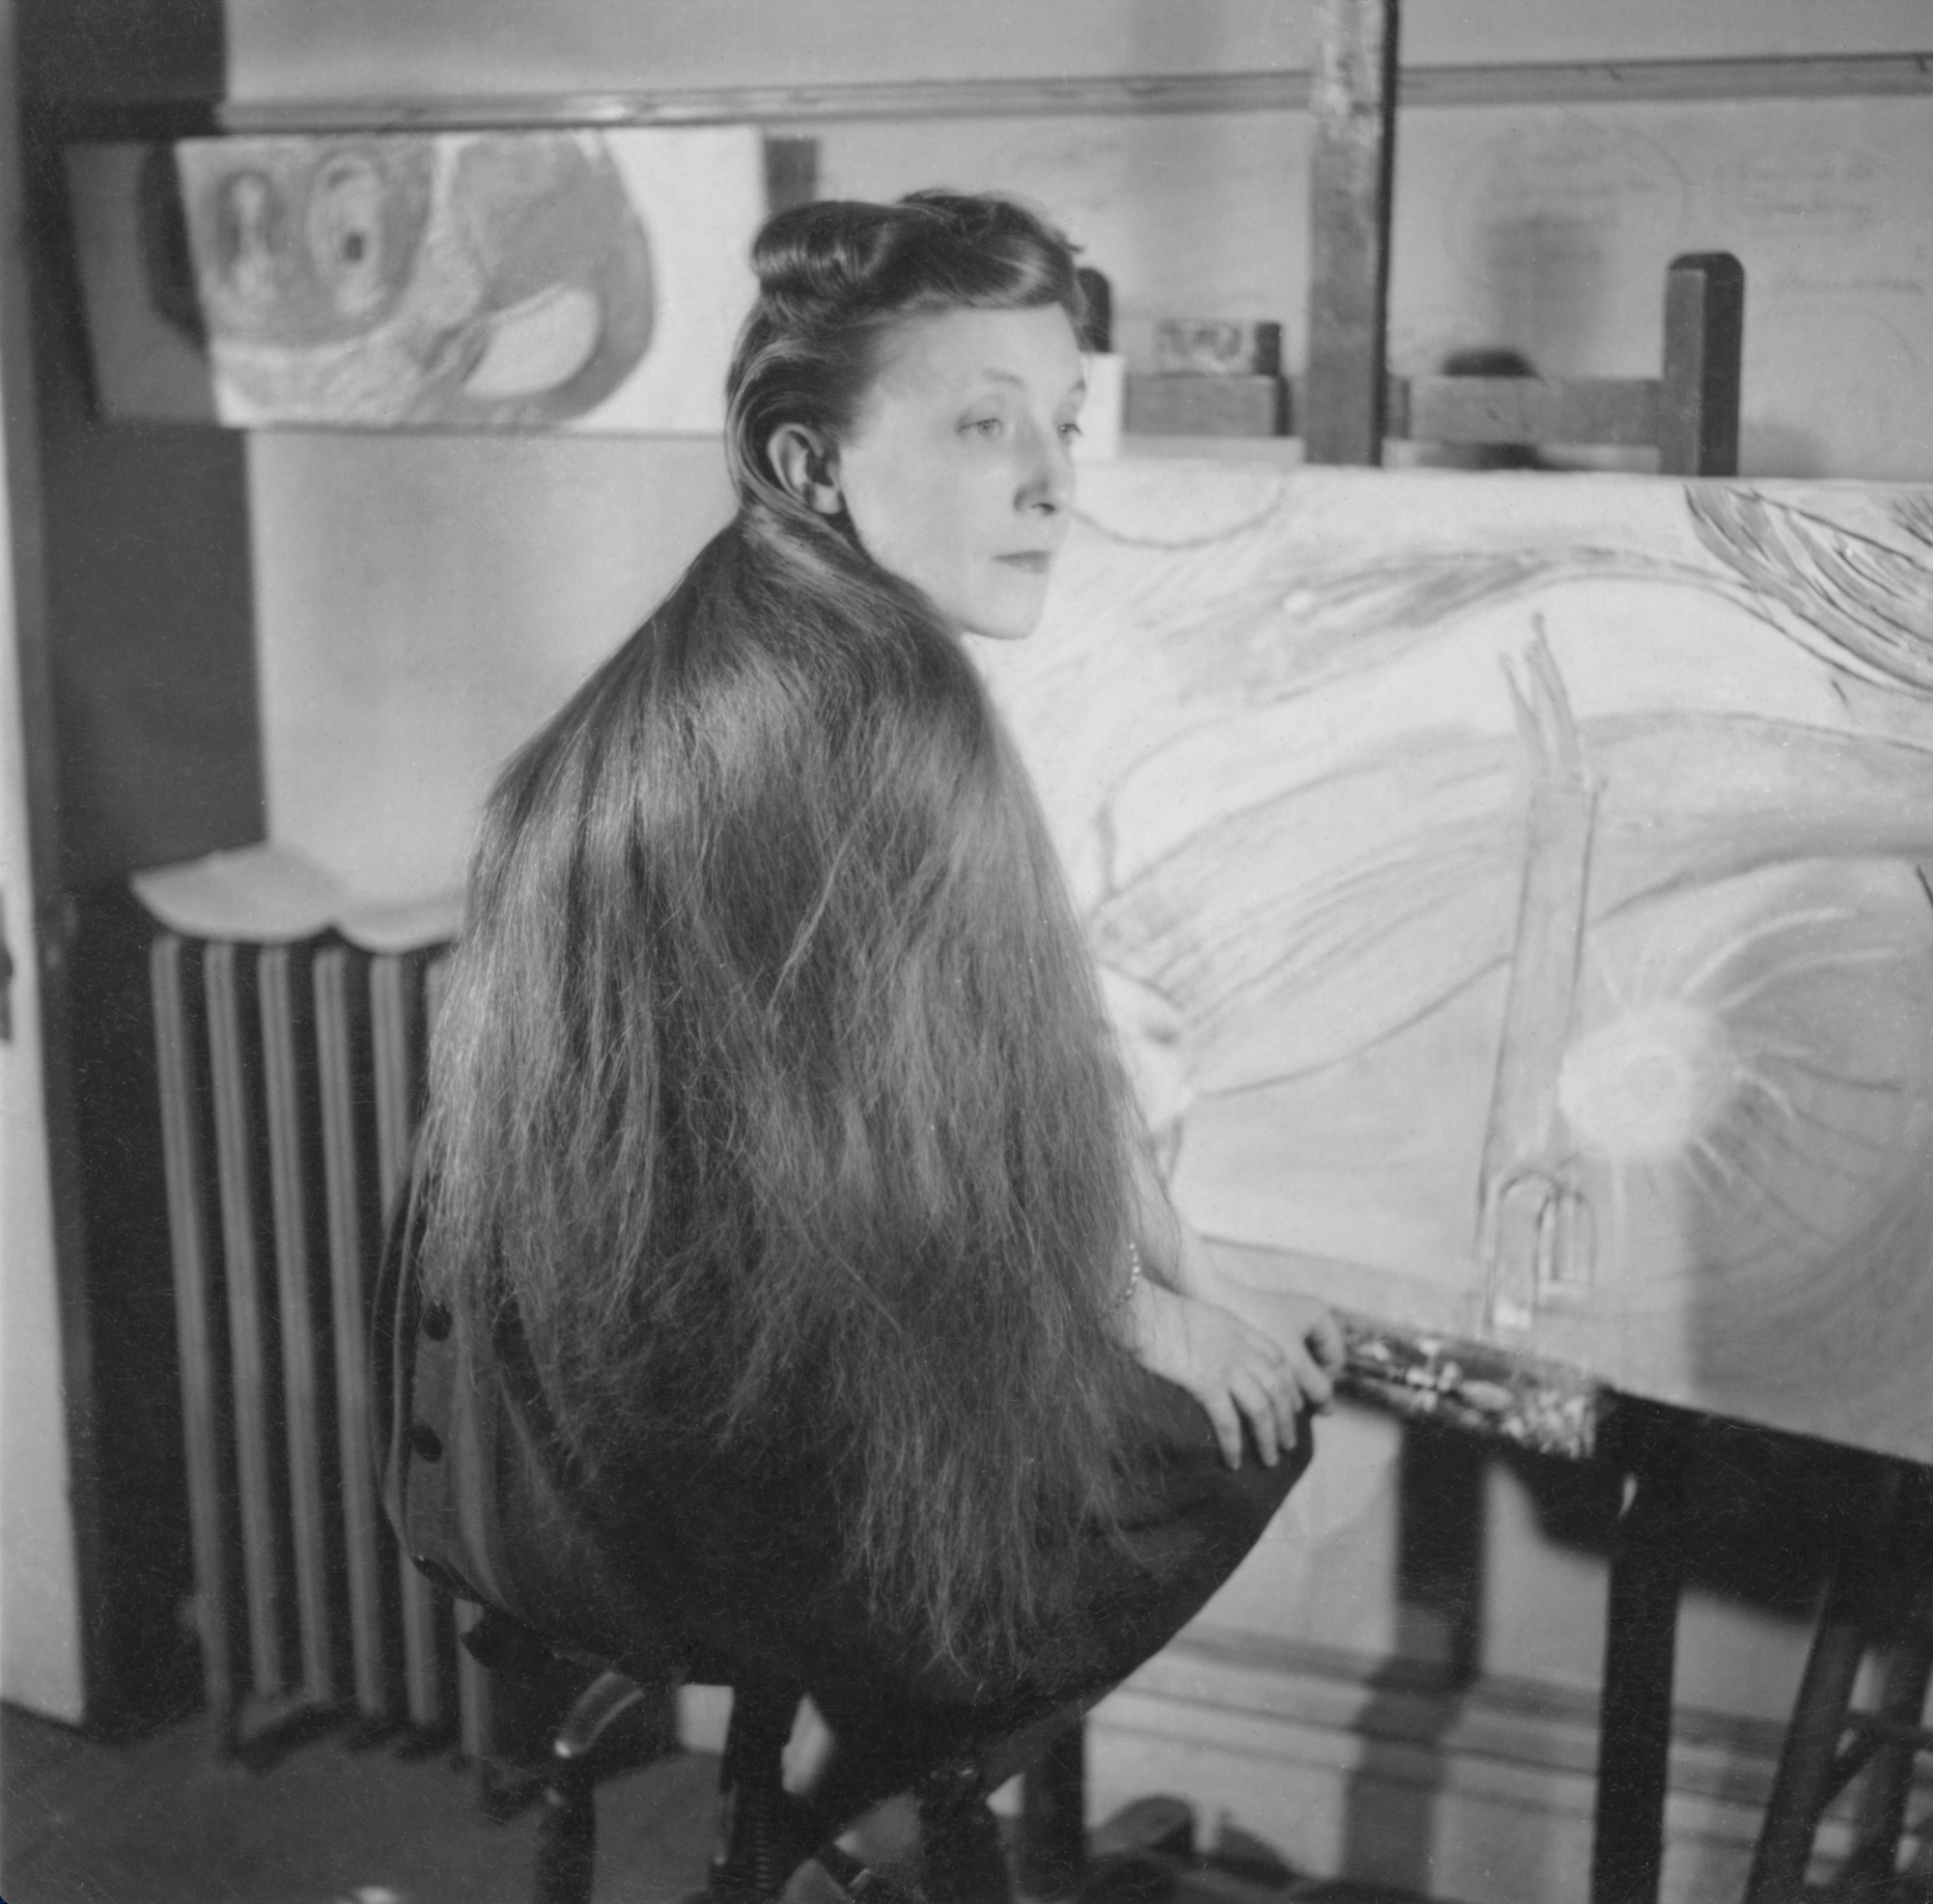 Unknown artist, ‘Louise Bourgeois in the studio of her apartment at 142 East 18th Street in NYC,’ circa 1946. Collection Louise Bourgeois archive, the Easton Foundation. © The Easton Foundation/Licensed by VAGA, NY.